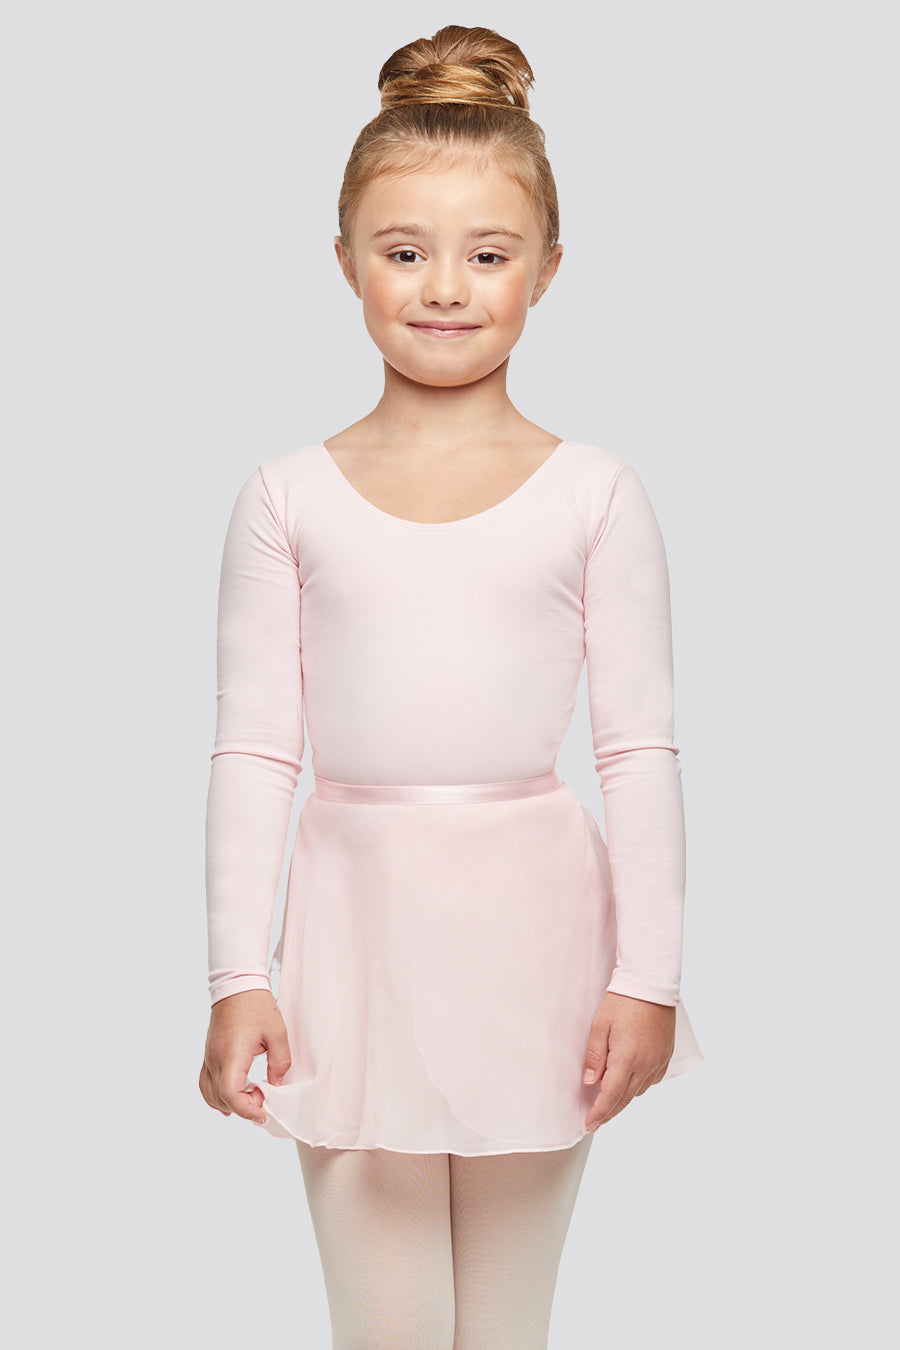 Pin On Ballet Clothes | lupon.gov.ph